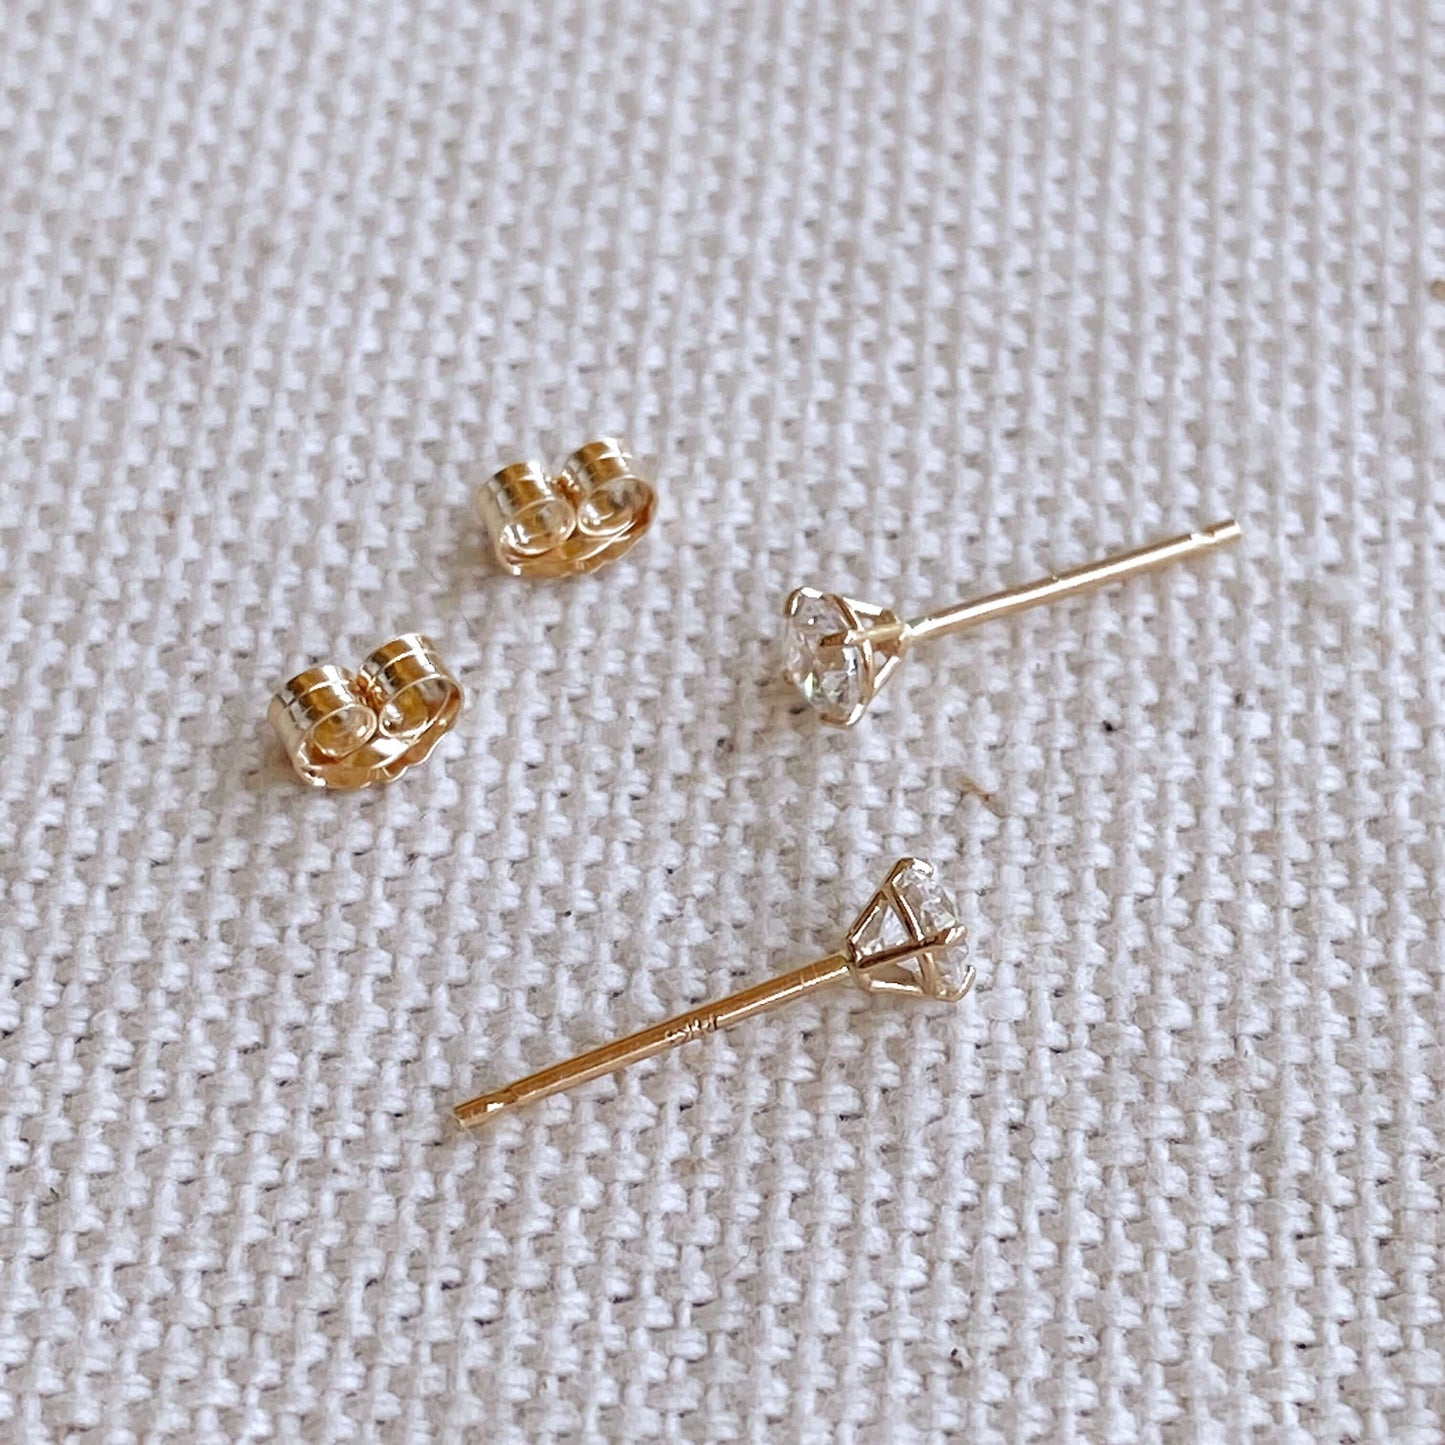 GoldFi 14k Solid Gold Round 3mm Cubic Zirconia Stud Earrings